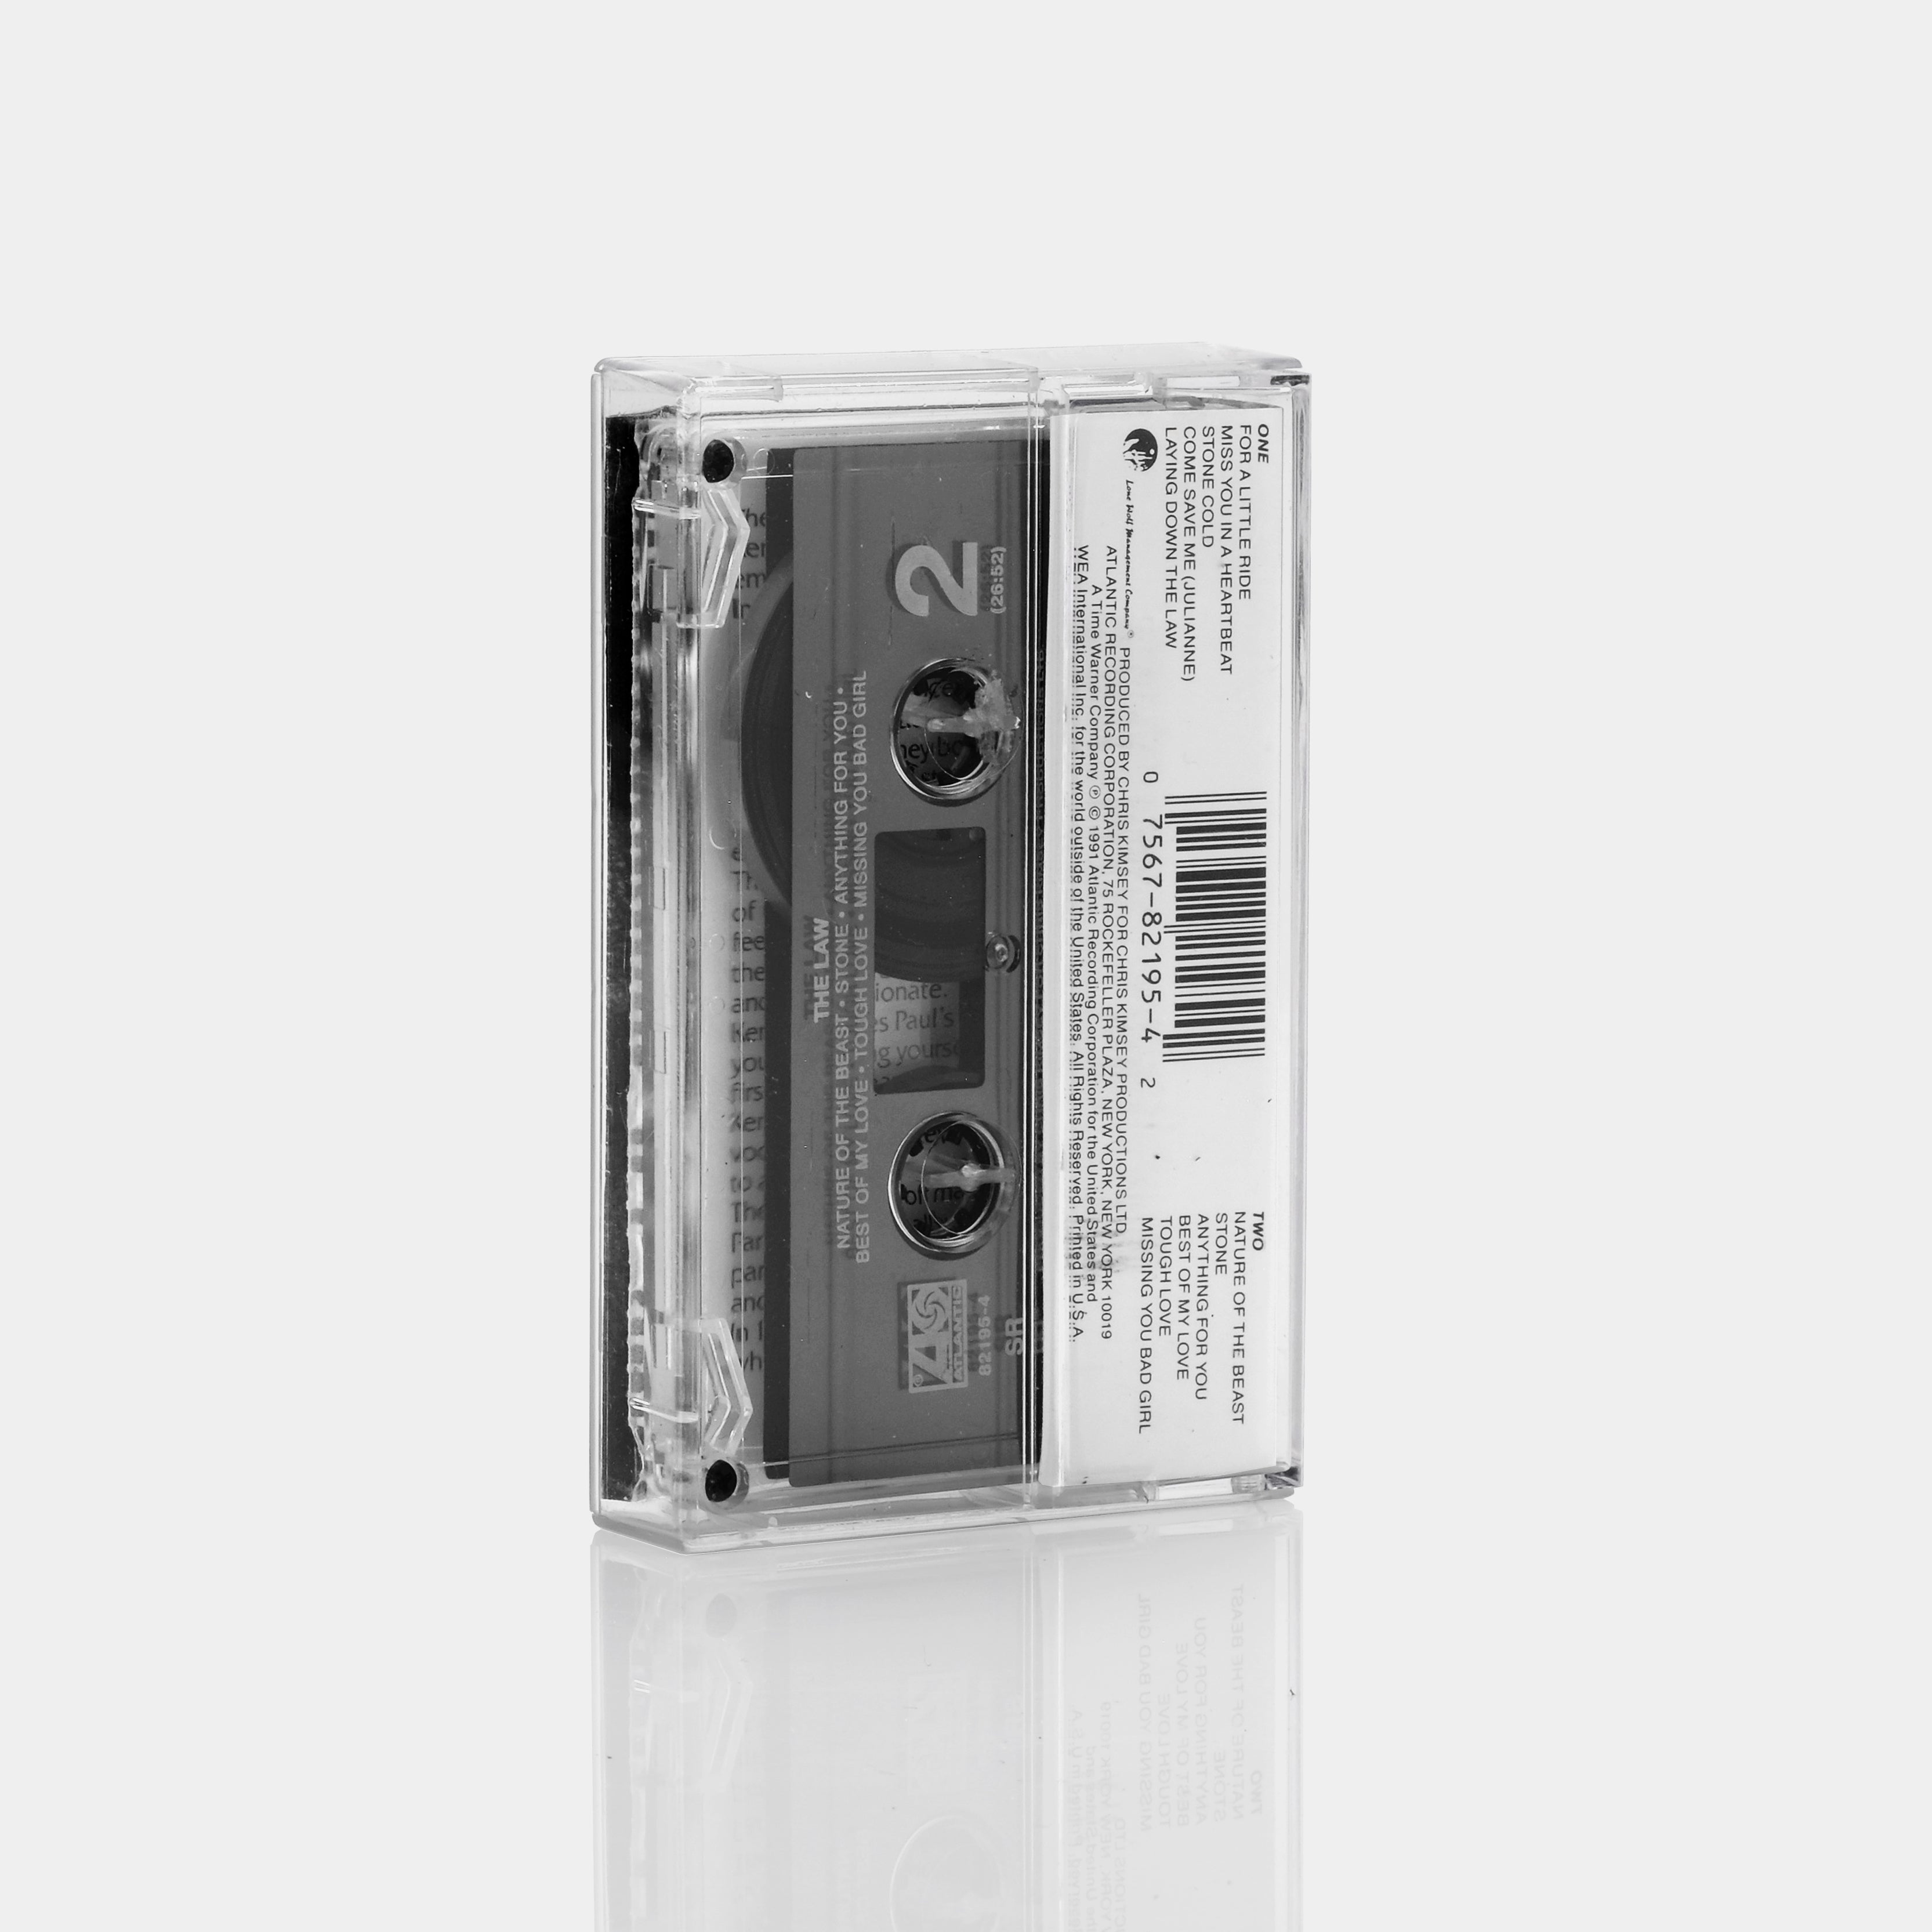 The Law - The Law Cassette Tape